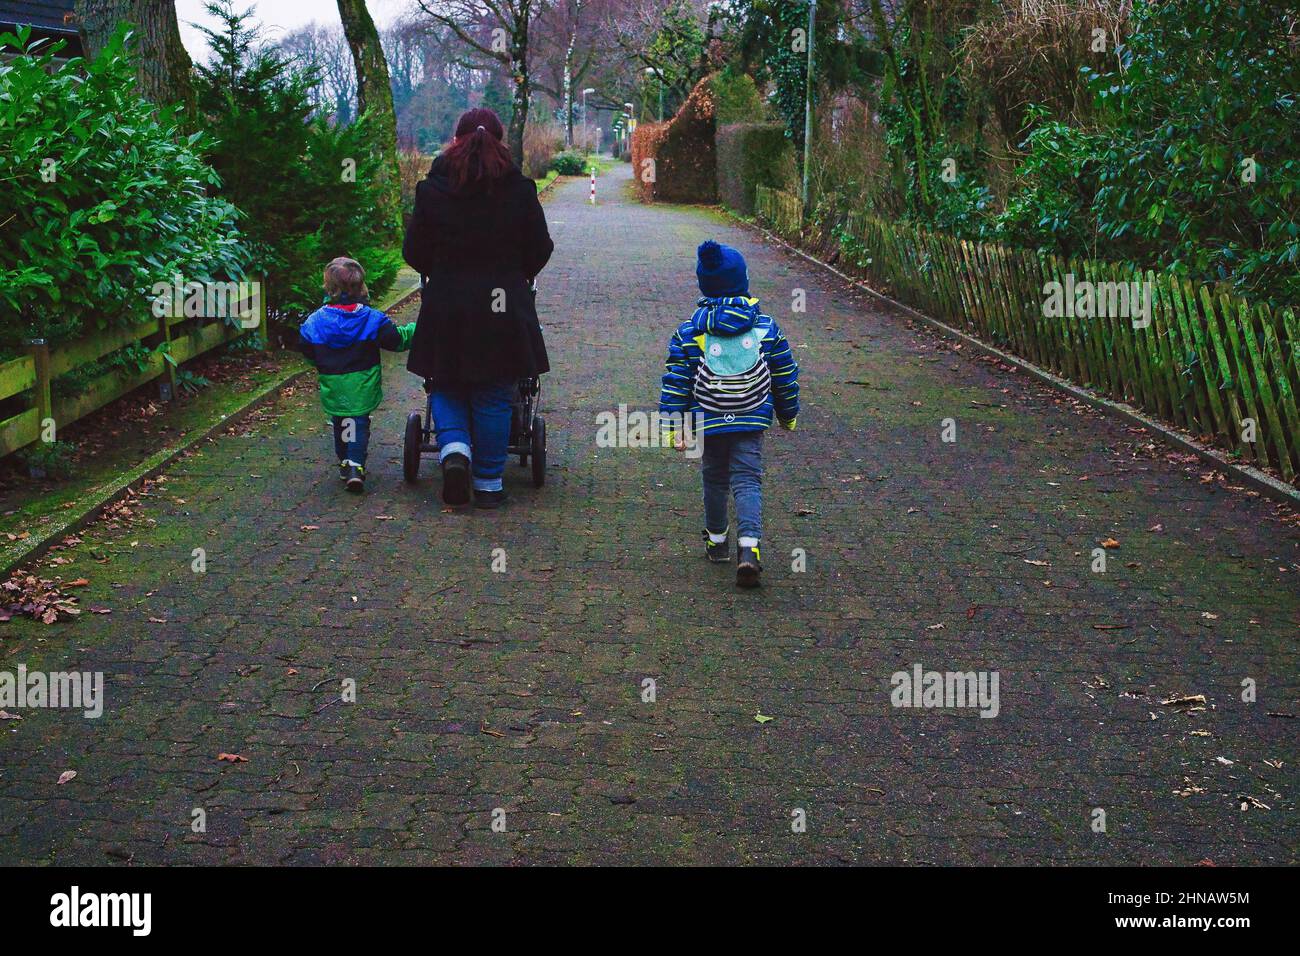 Mother with stroller and small children taking a walk Stock Photo